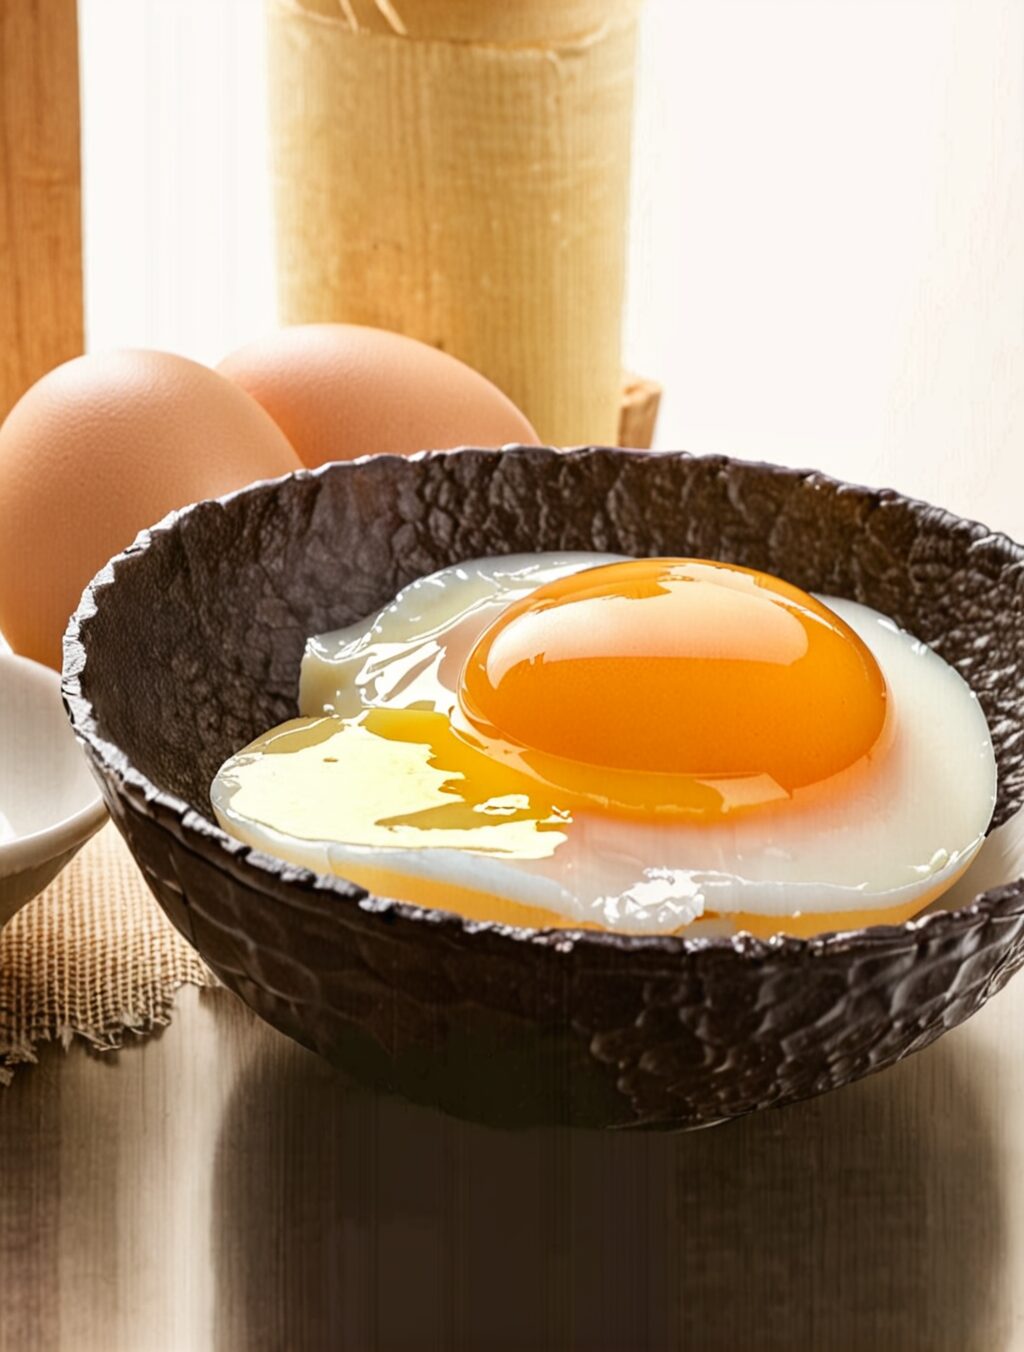 why can you eat raw eggs in japan but not america